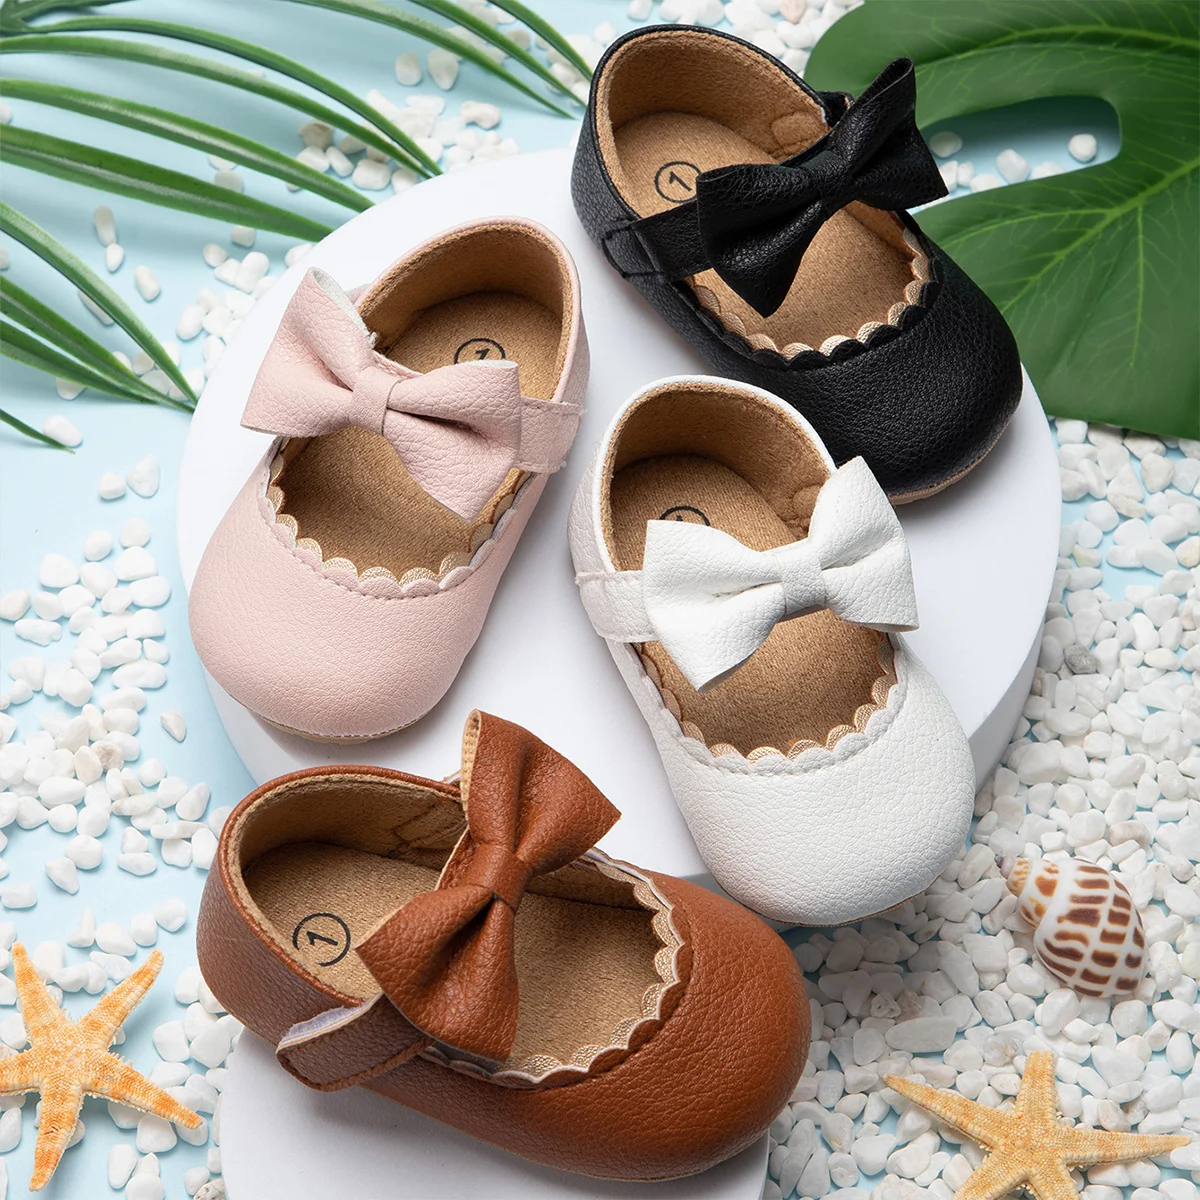 

Baby Casual Shoes Infant Toddler Bowknot Non-slip Rubber Soft-Sole Flat PU First Walker Newborn Bow Decor Mary Janes